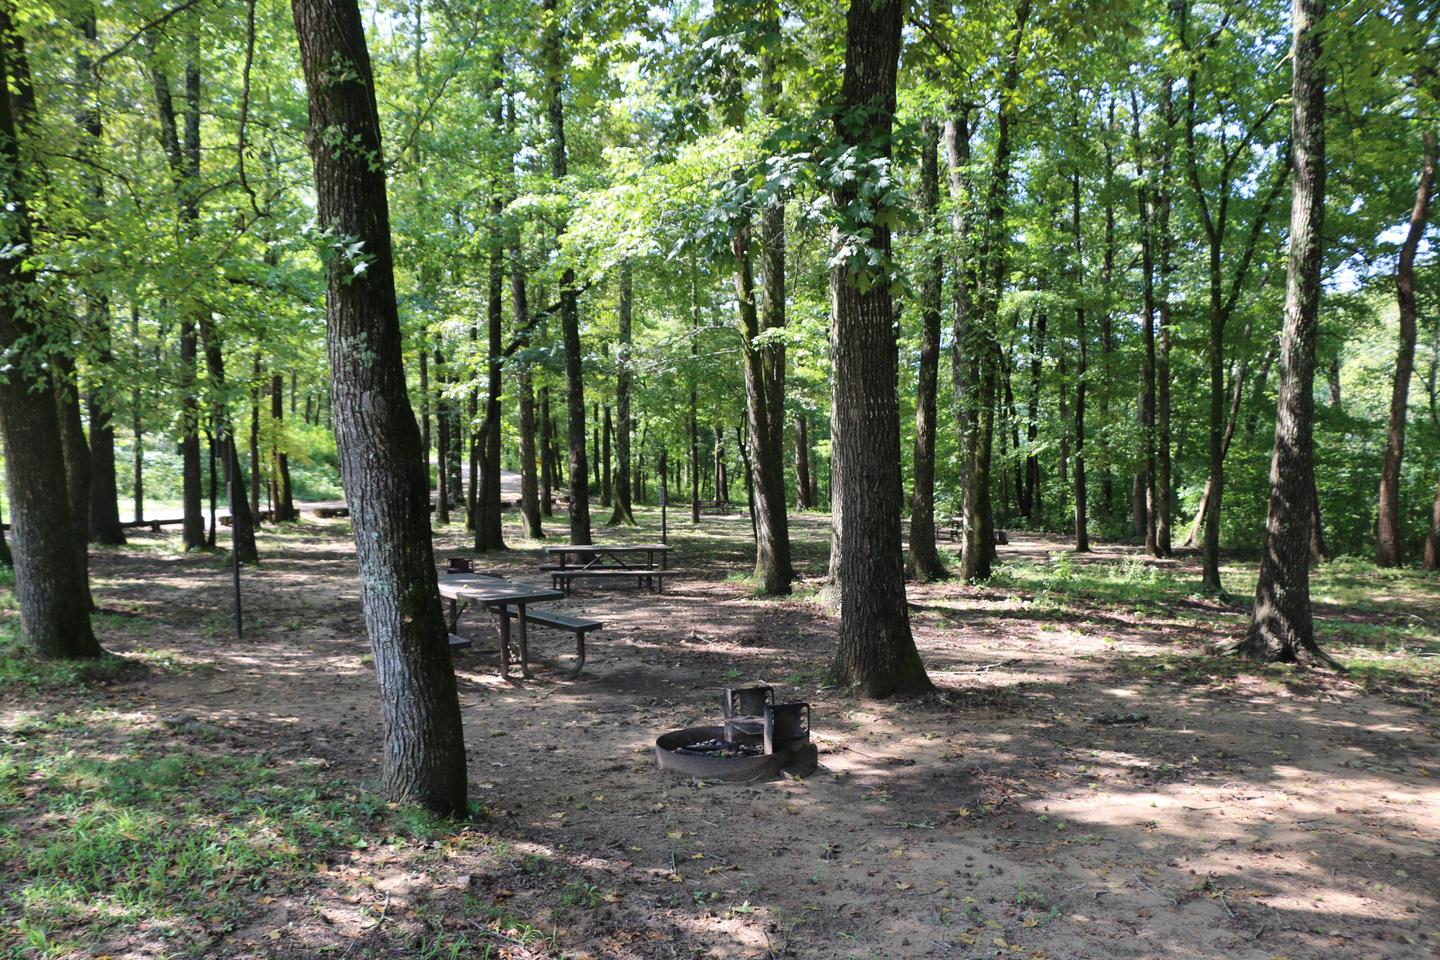 Ozark CampgroundShaded sites are available for tent camping at Ozark Campground.